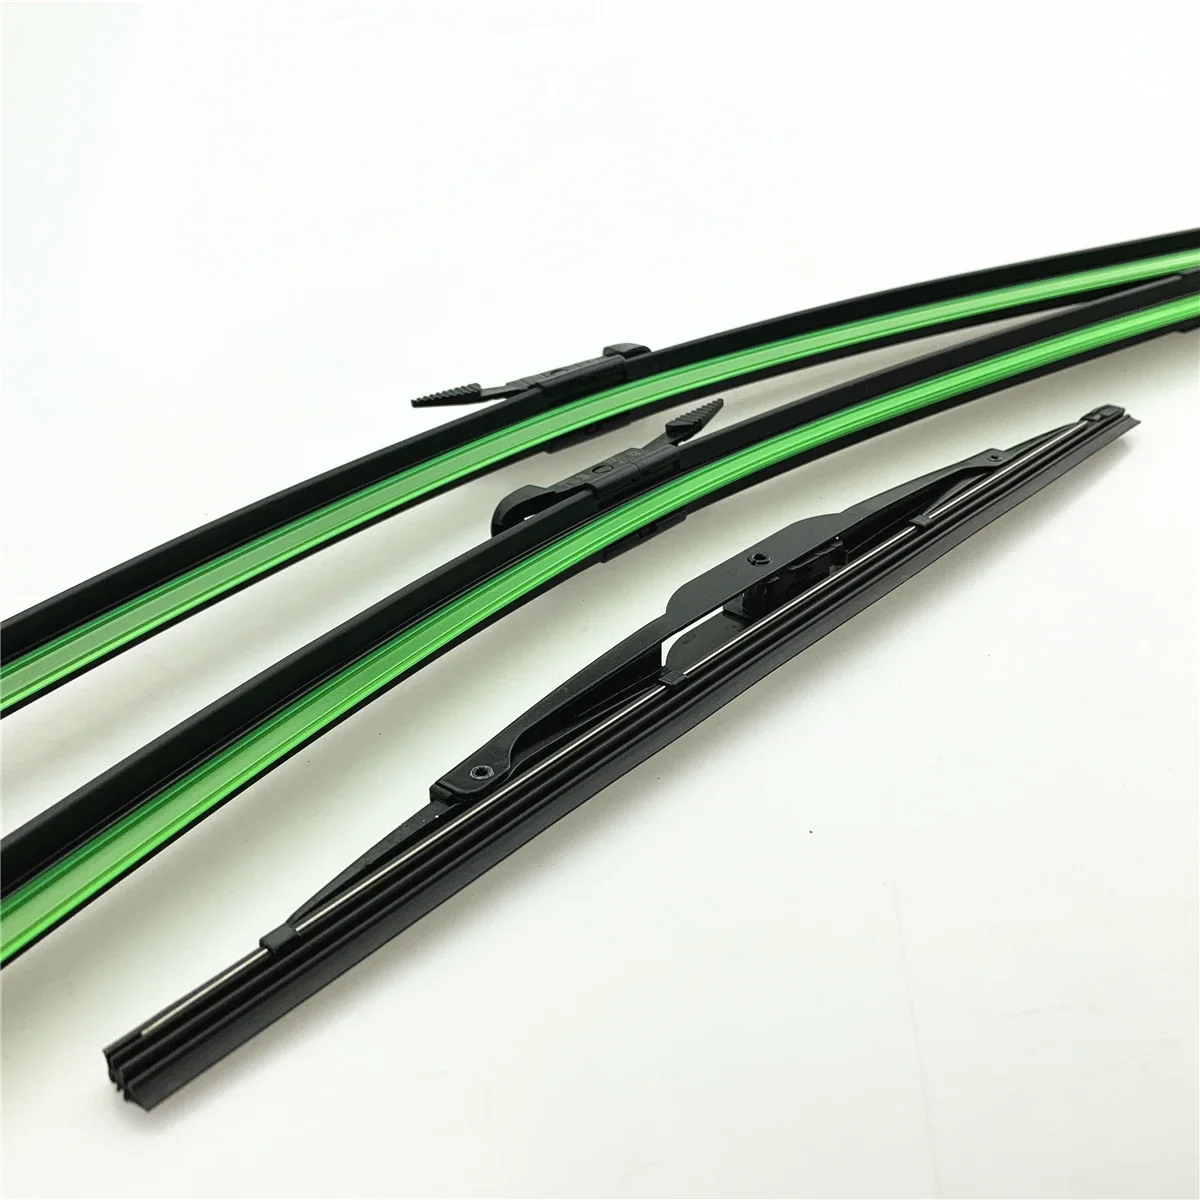 

For For Freelander 2nd Generation car Boneless Wiper Strip Front and Rear Wiper Blade Modification